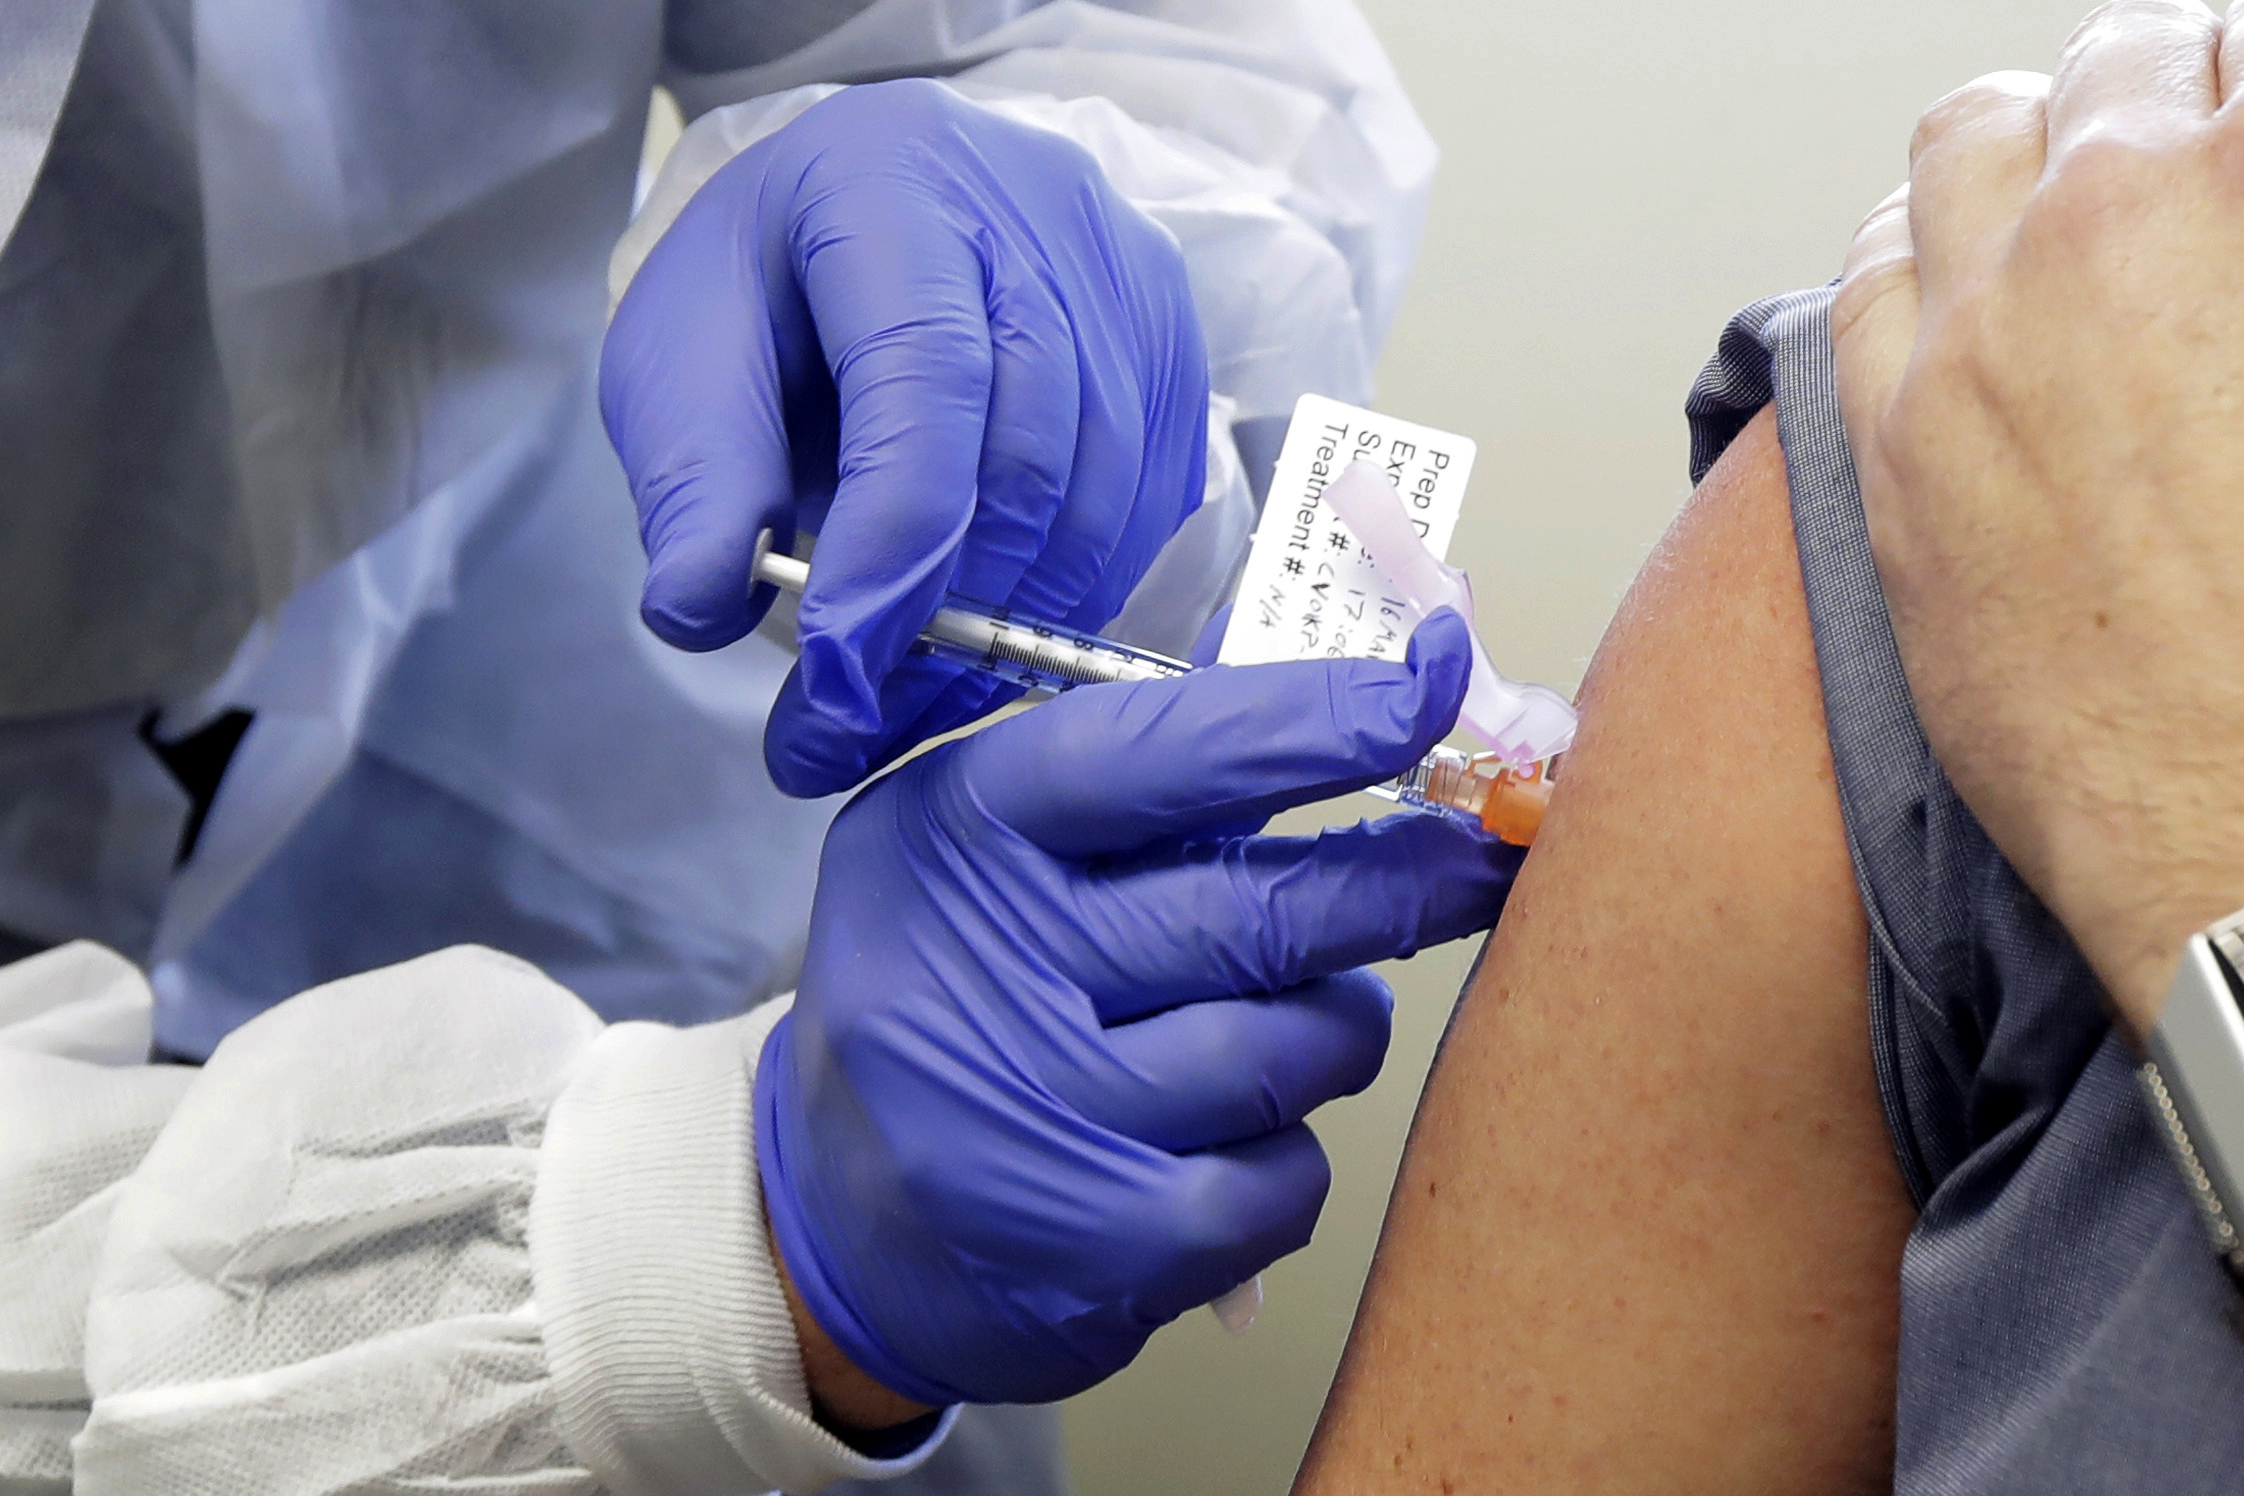 A person in Seattle receives a shot on March 16 in the first-stage clinical trial for a potential Covid-19 vaccine.